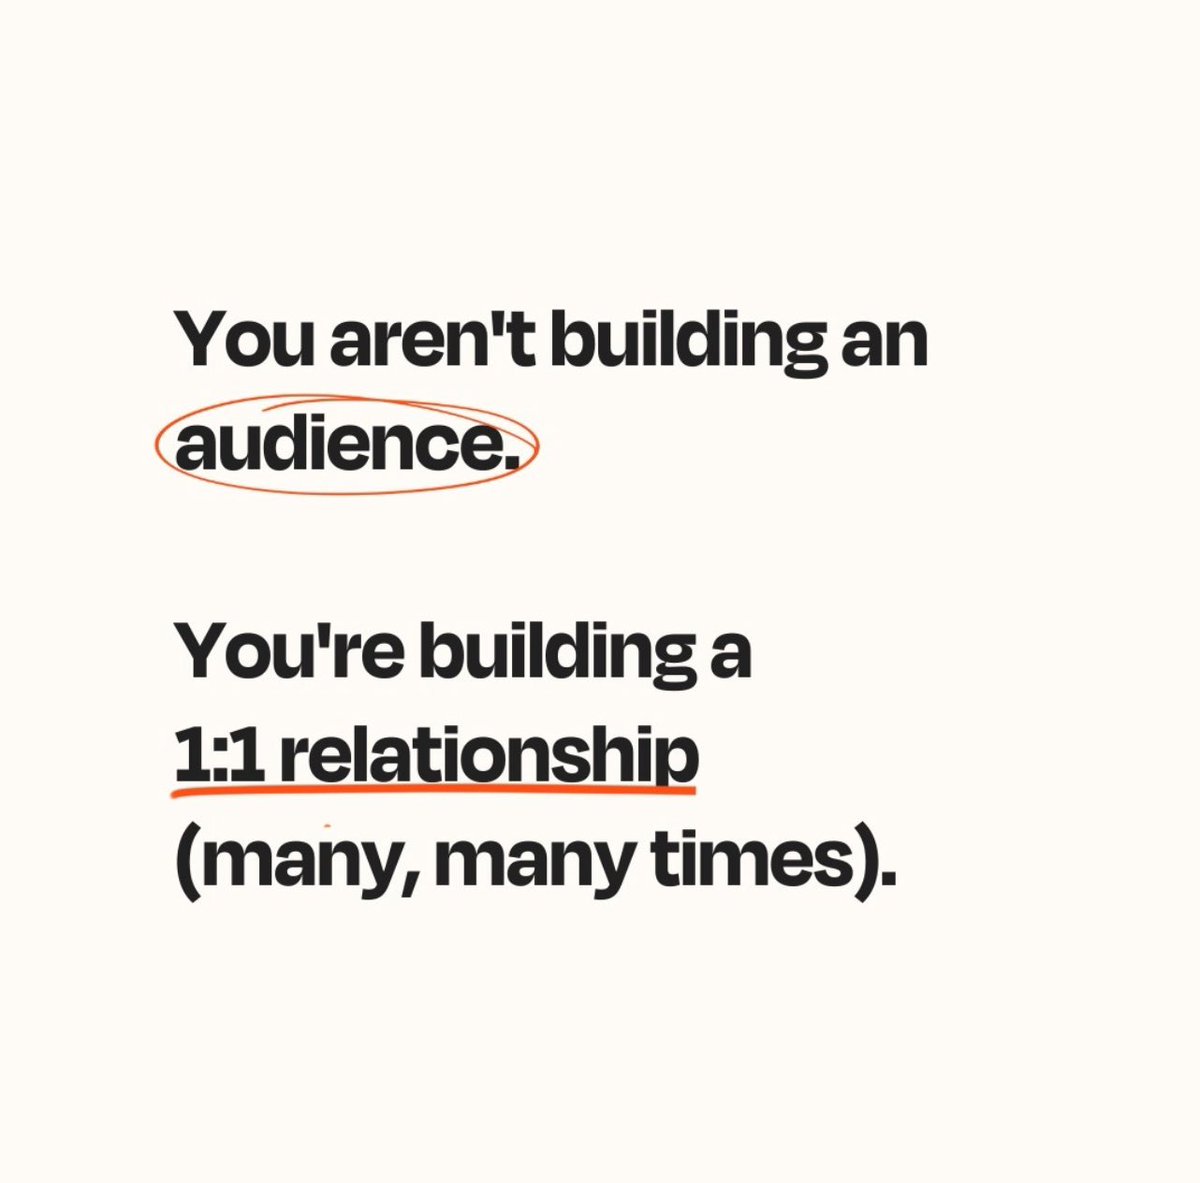 People talk about 'audiences' as if there are blobs of people floating around that you just have to attach yourself to – like a school of fish or something. It's not like that at all. An 'audience' is actually a collection of many 1:1 relationships. That sounds hard and slow